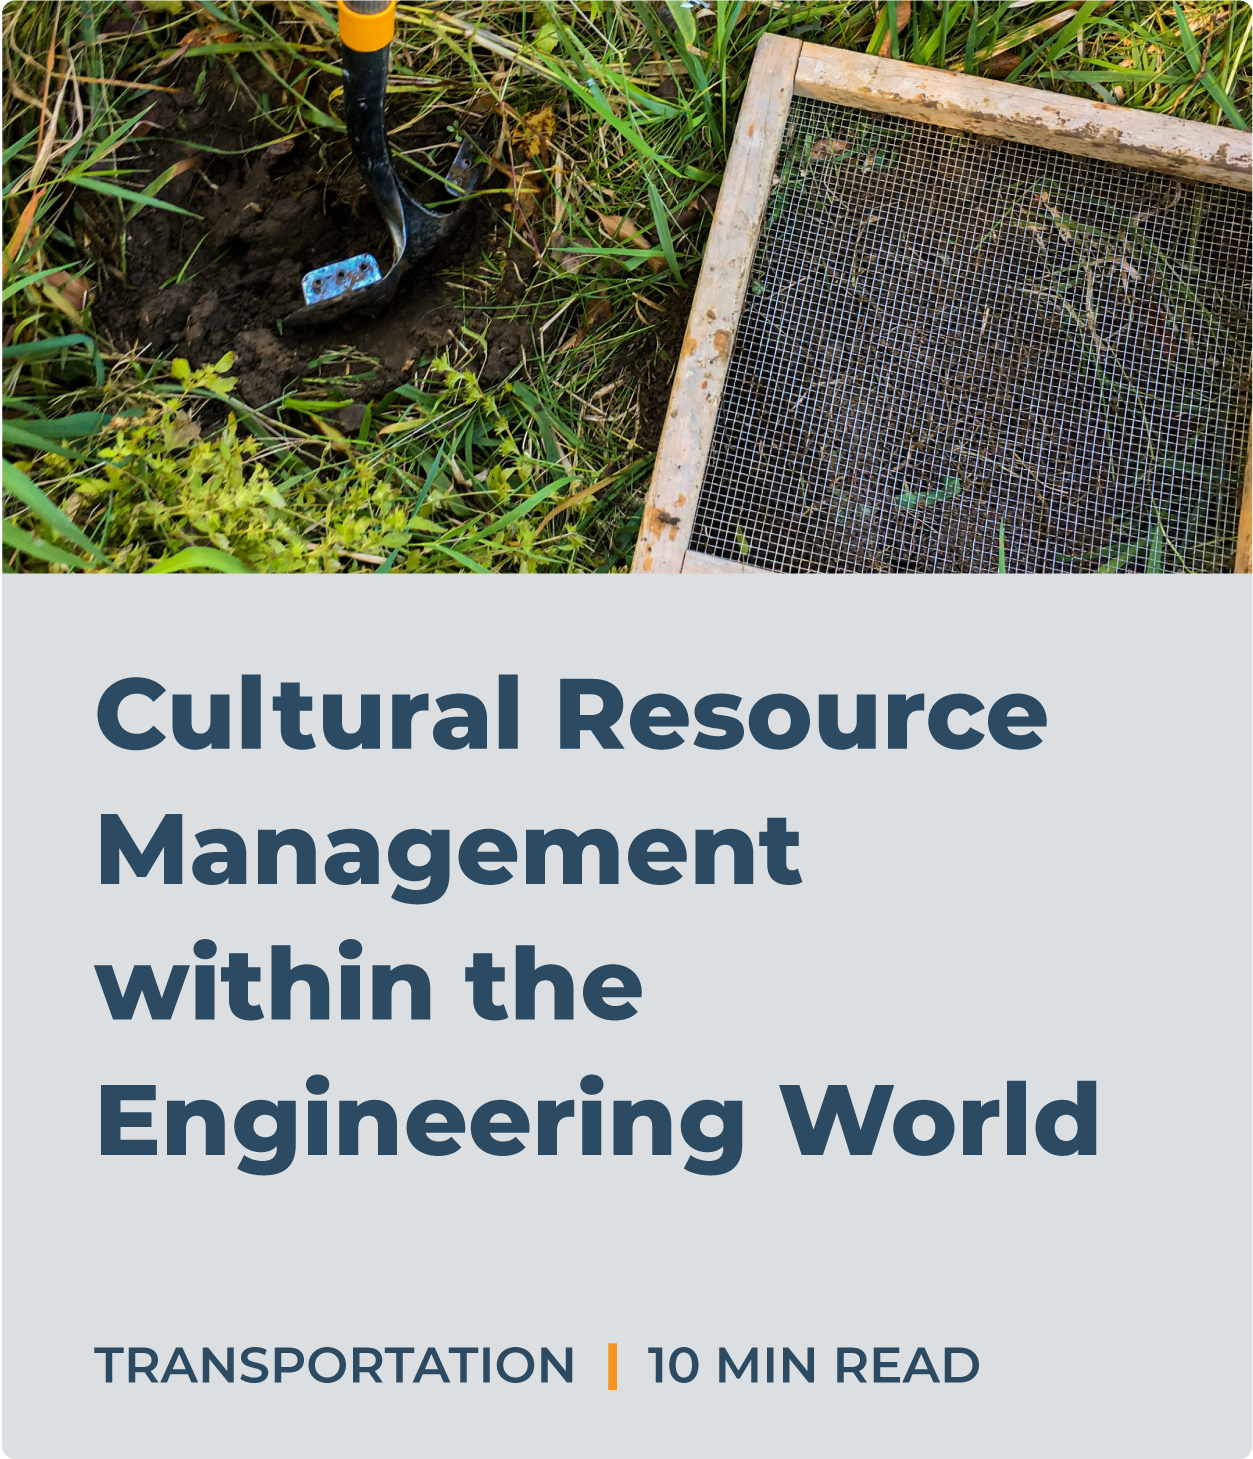 Cultural Resource Management within the Engineering World